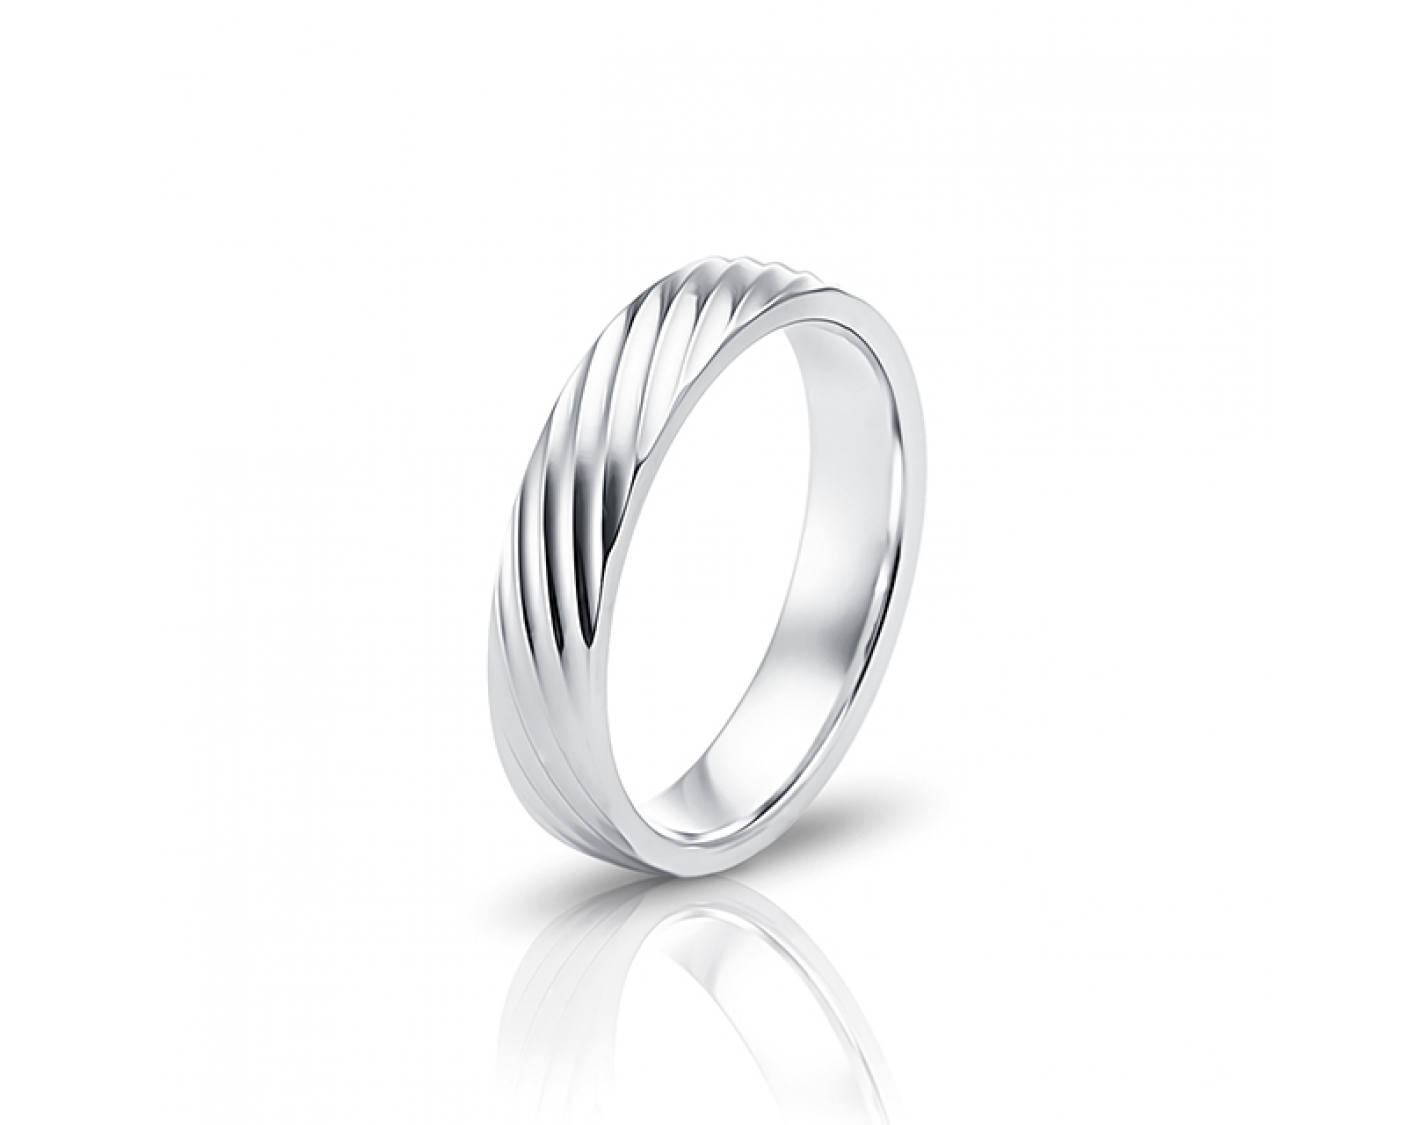 18k white gold 5mm matte wedding band with shiny lines Photos & images